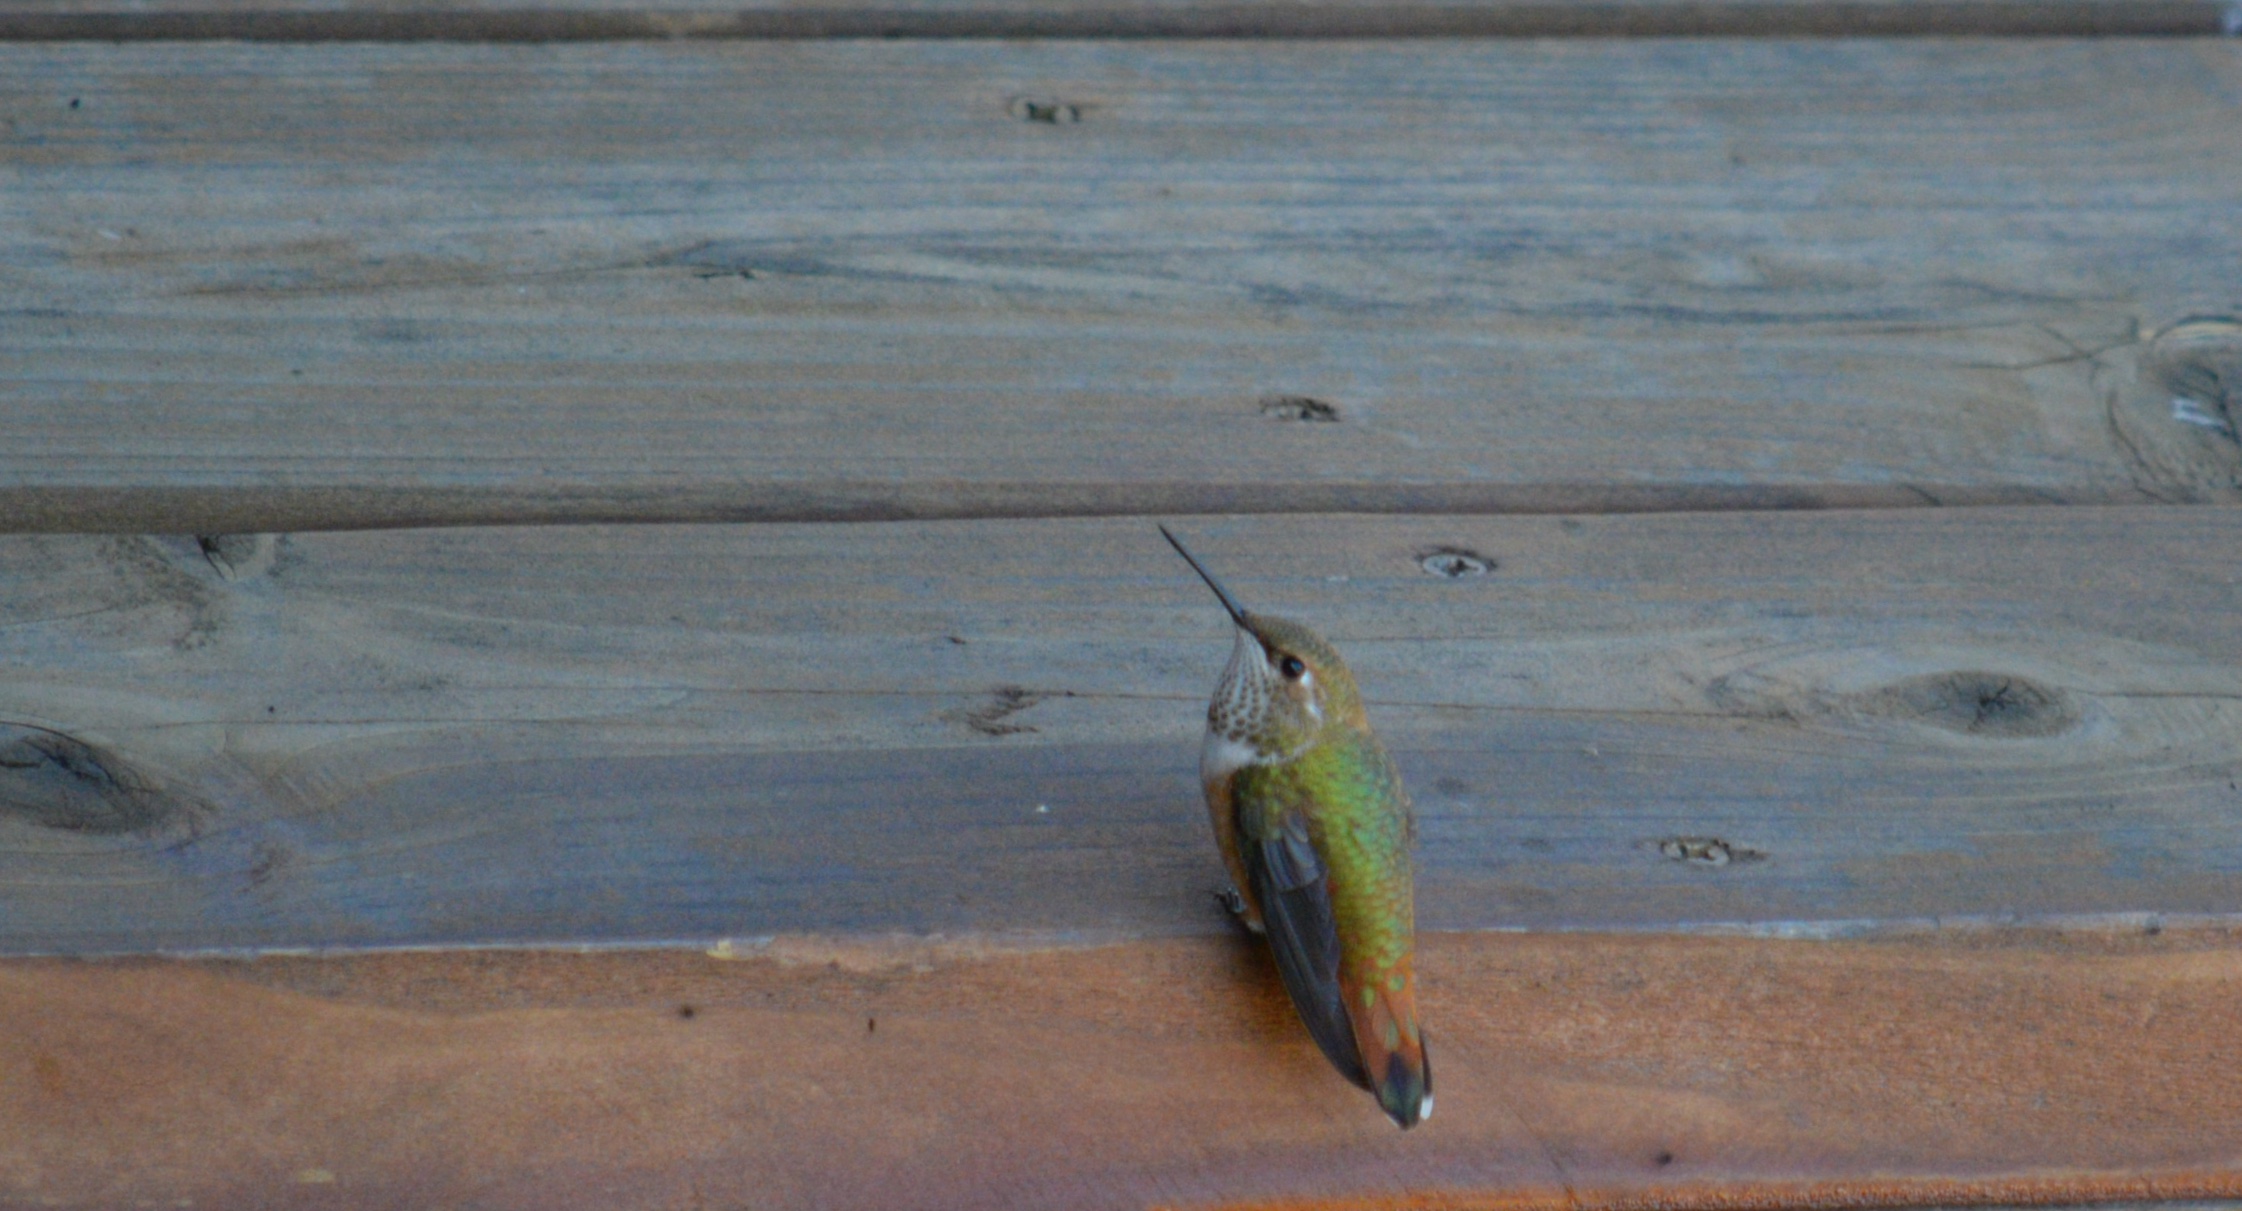 a single daring hummingbird resting on a wooden deck waiting to take flight